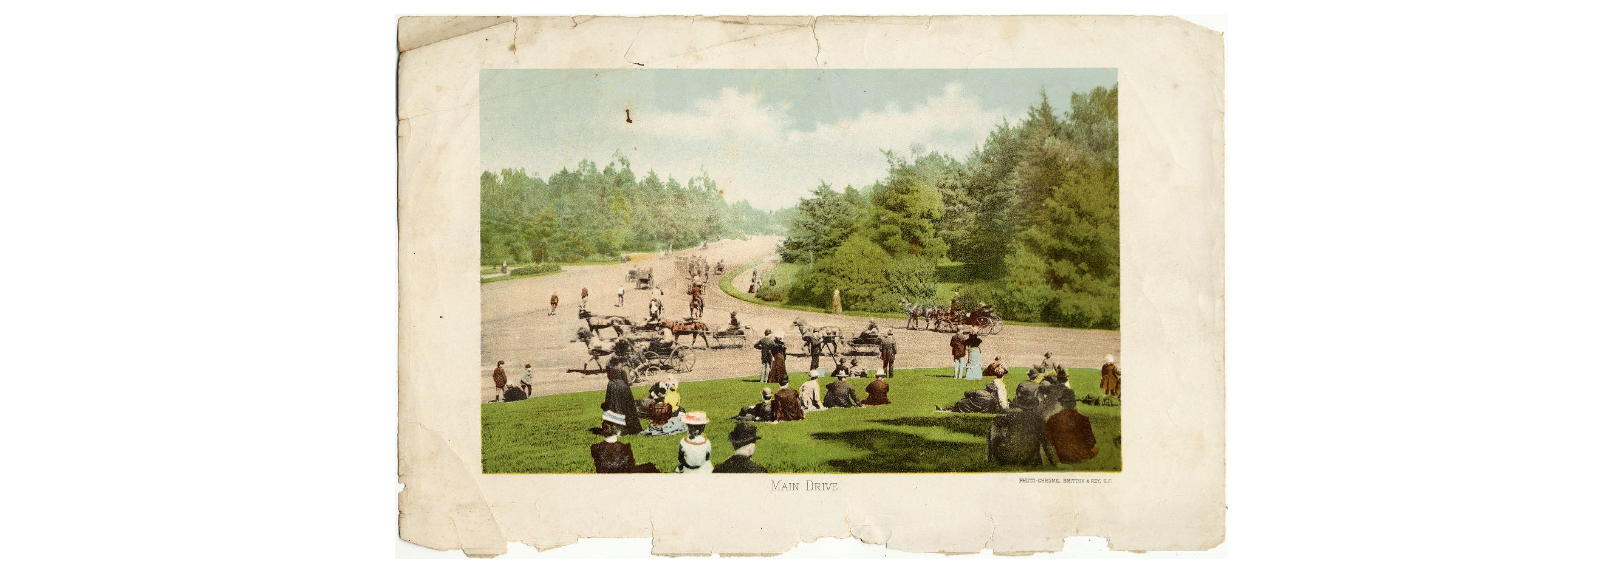 A photochrome print of the main drive of Golden Gate Park with people in 1800 clothes picnicking in the foreground and horse and buggy in the backround.